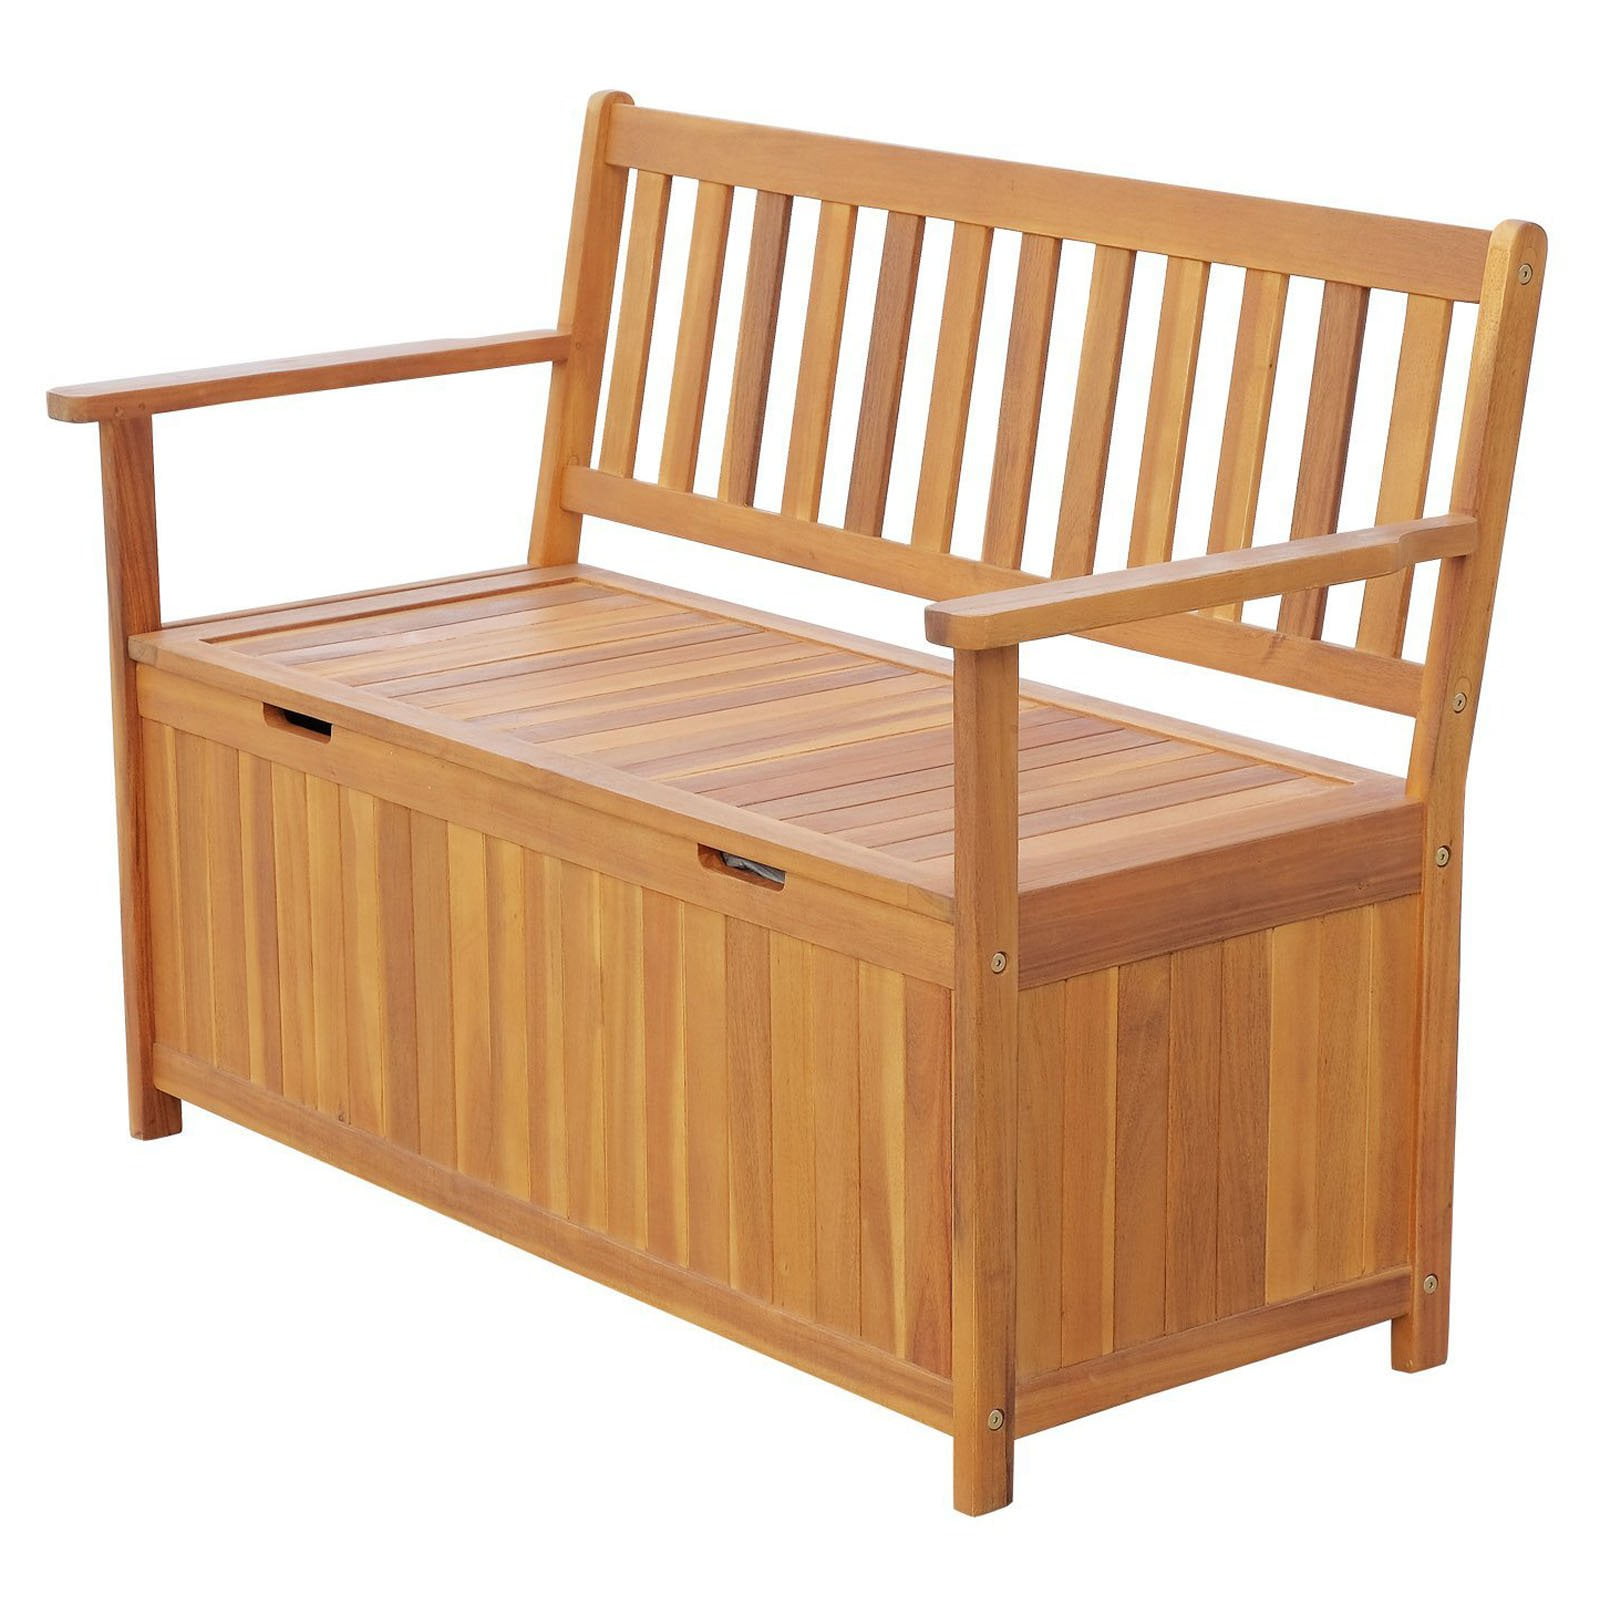 Outsunny Wooden 47 In Outdoor Storage, Bench Seat With Storage Outdoor